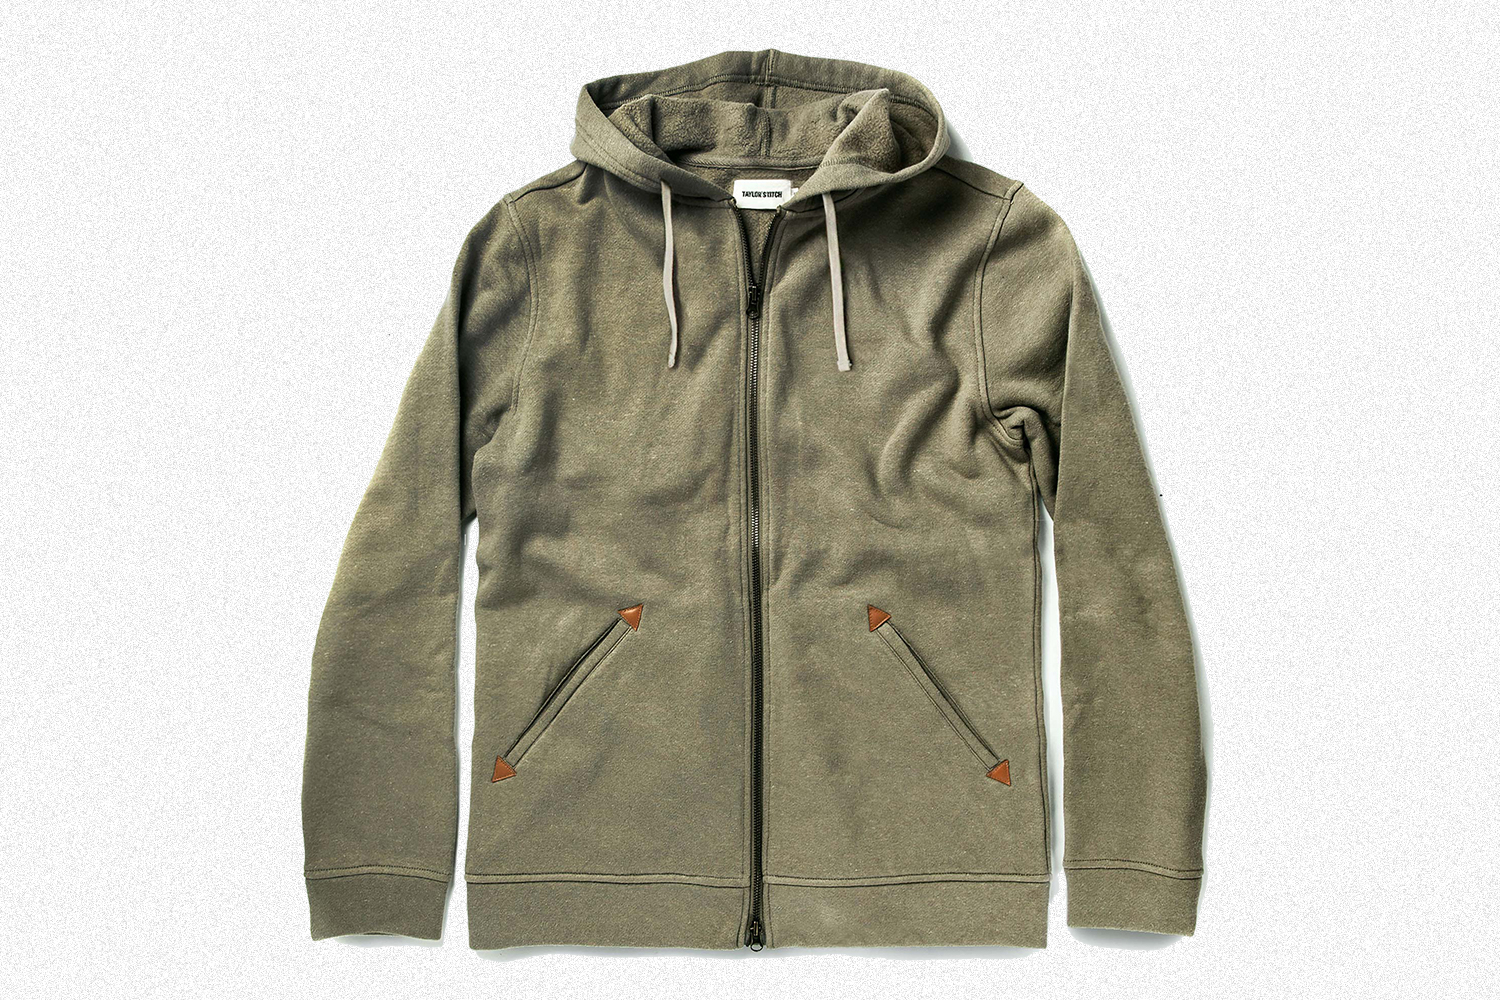 Apres Hoodie from Taylor Stitch